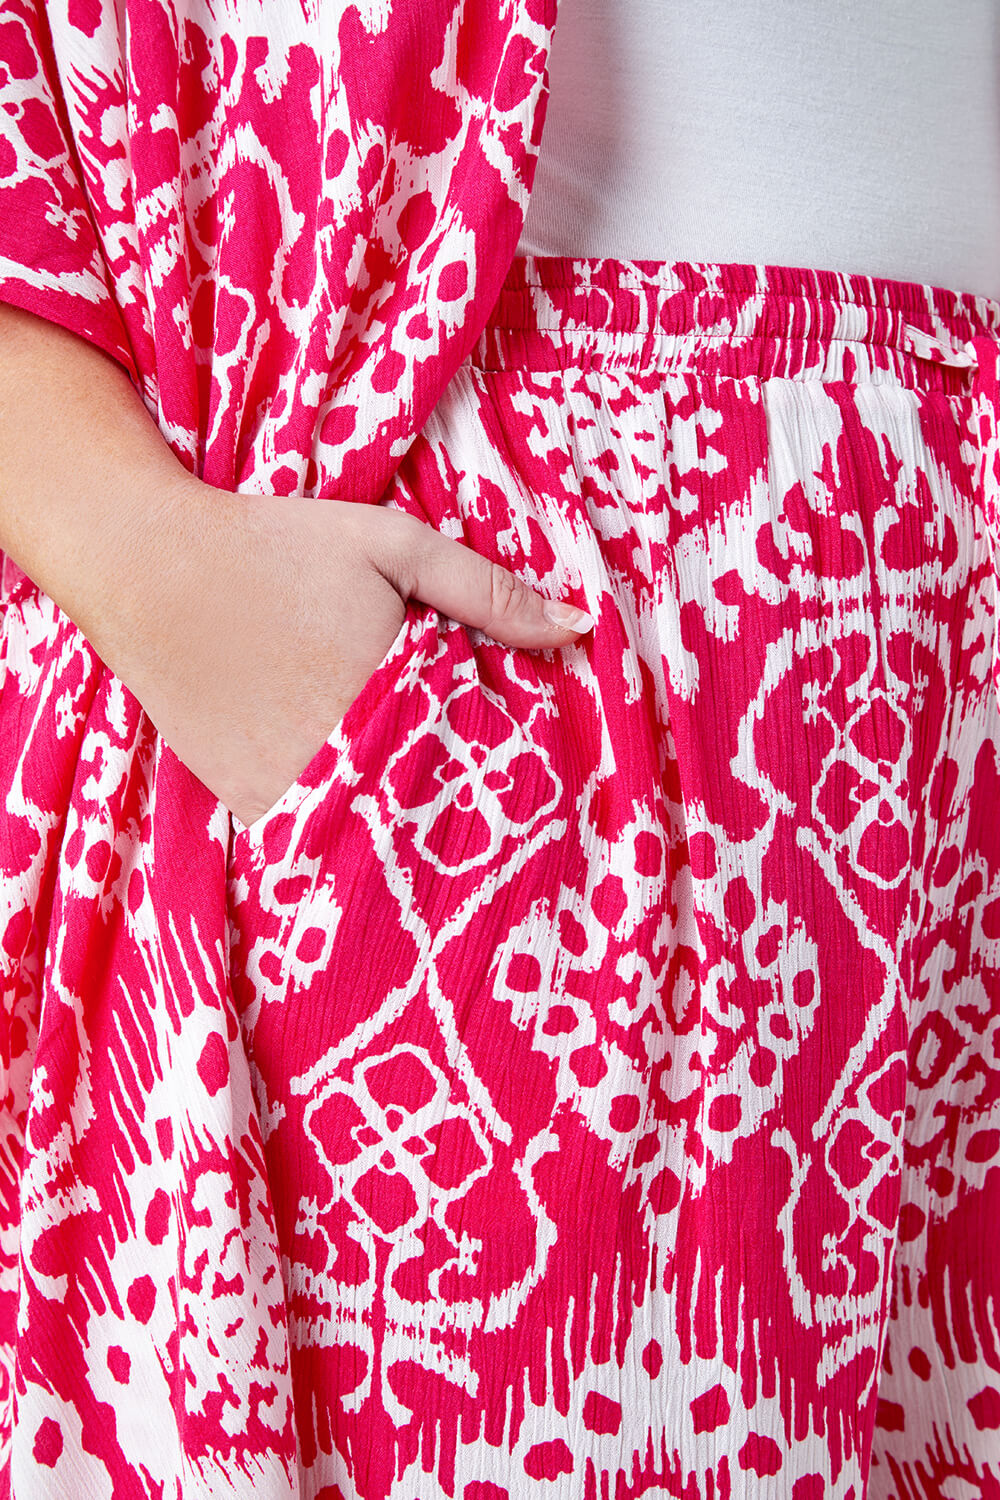 PINK Curve Aztec Print Crinkle Shorts, Image 5 of 5